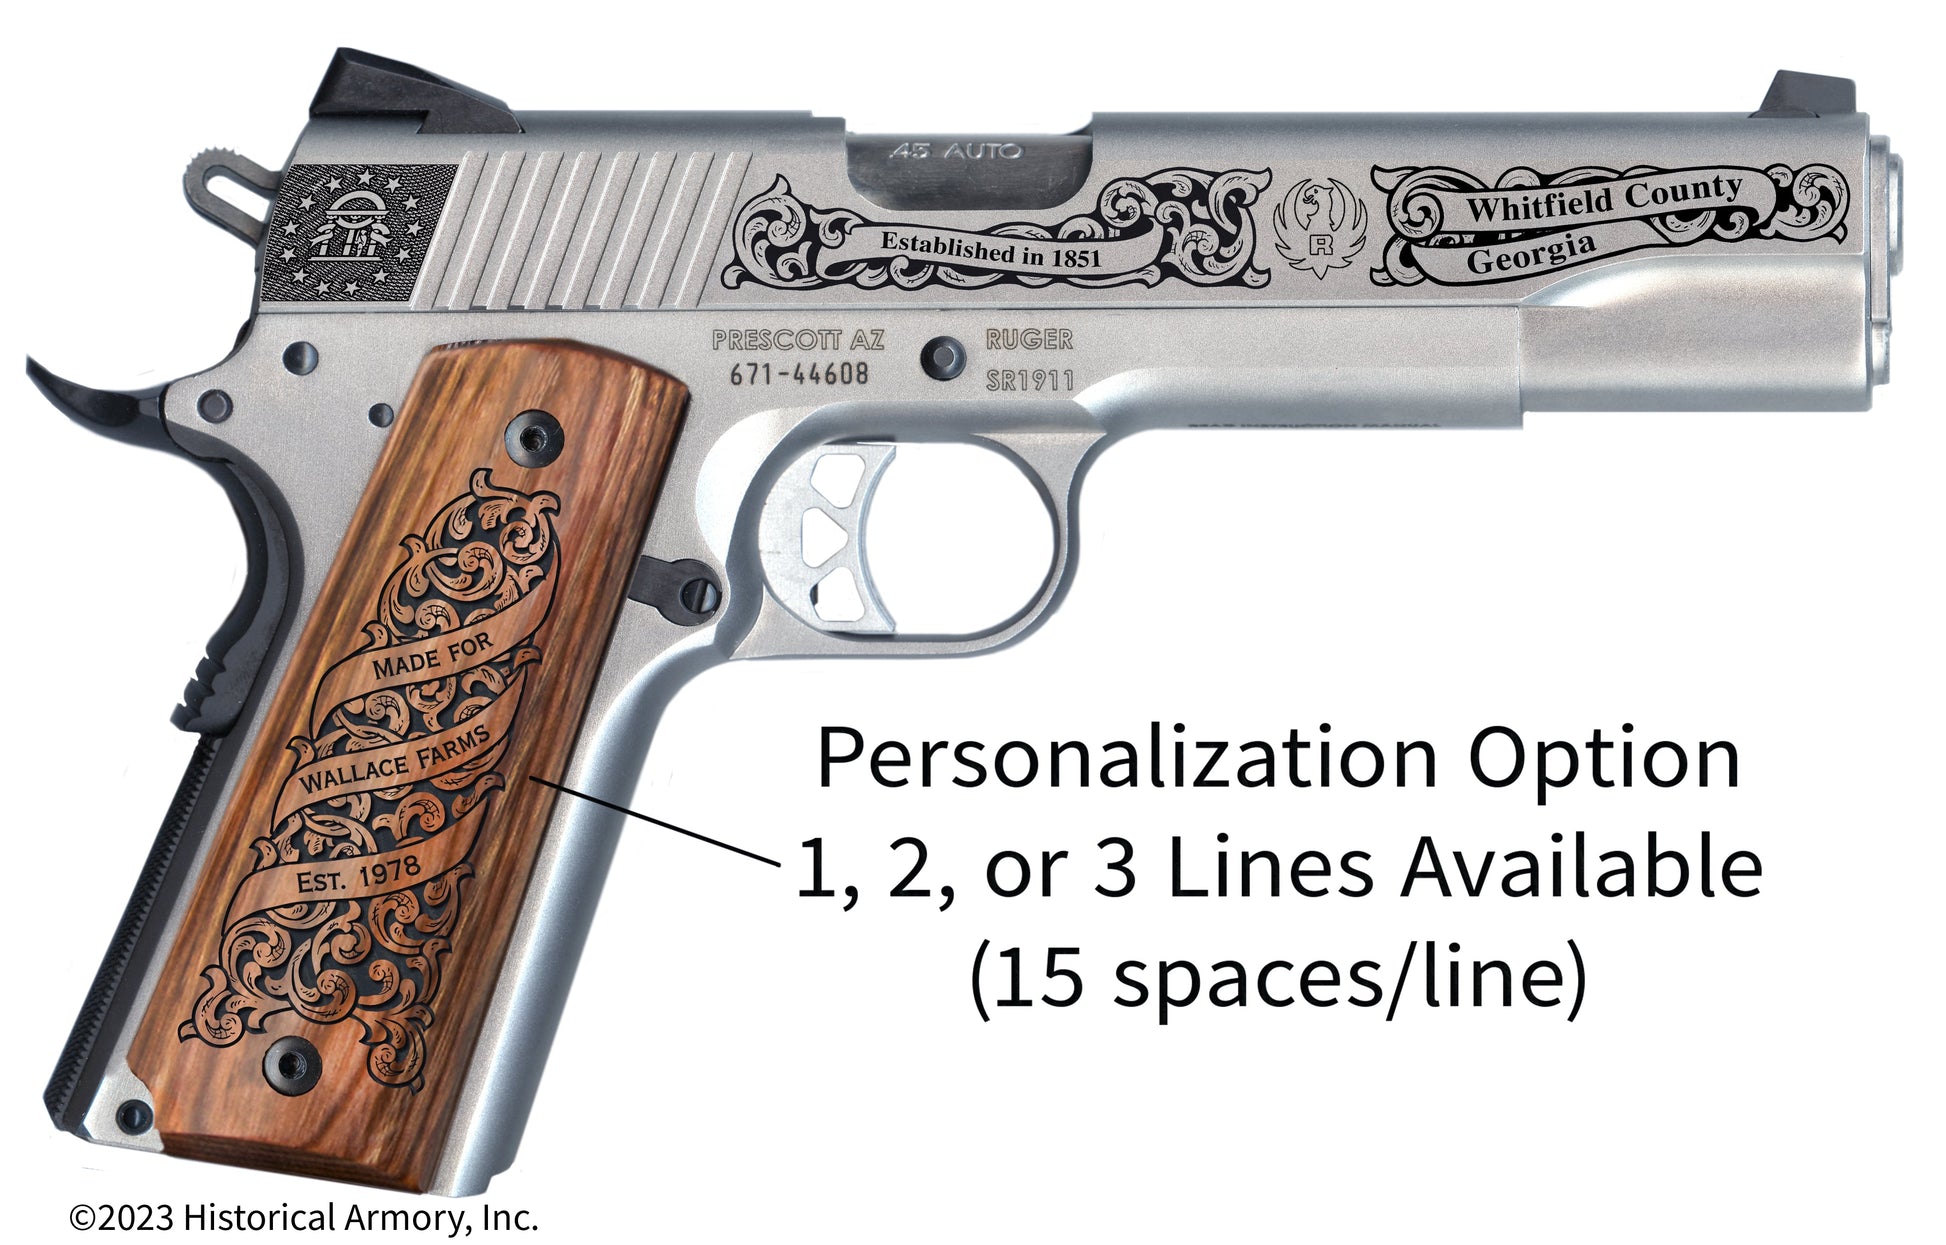 Whitfield County Georgia Personalized Engraved .45 Auto Ruger 1911